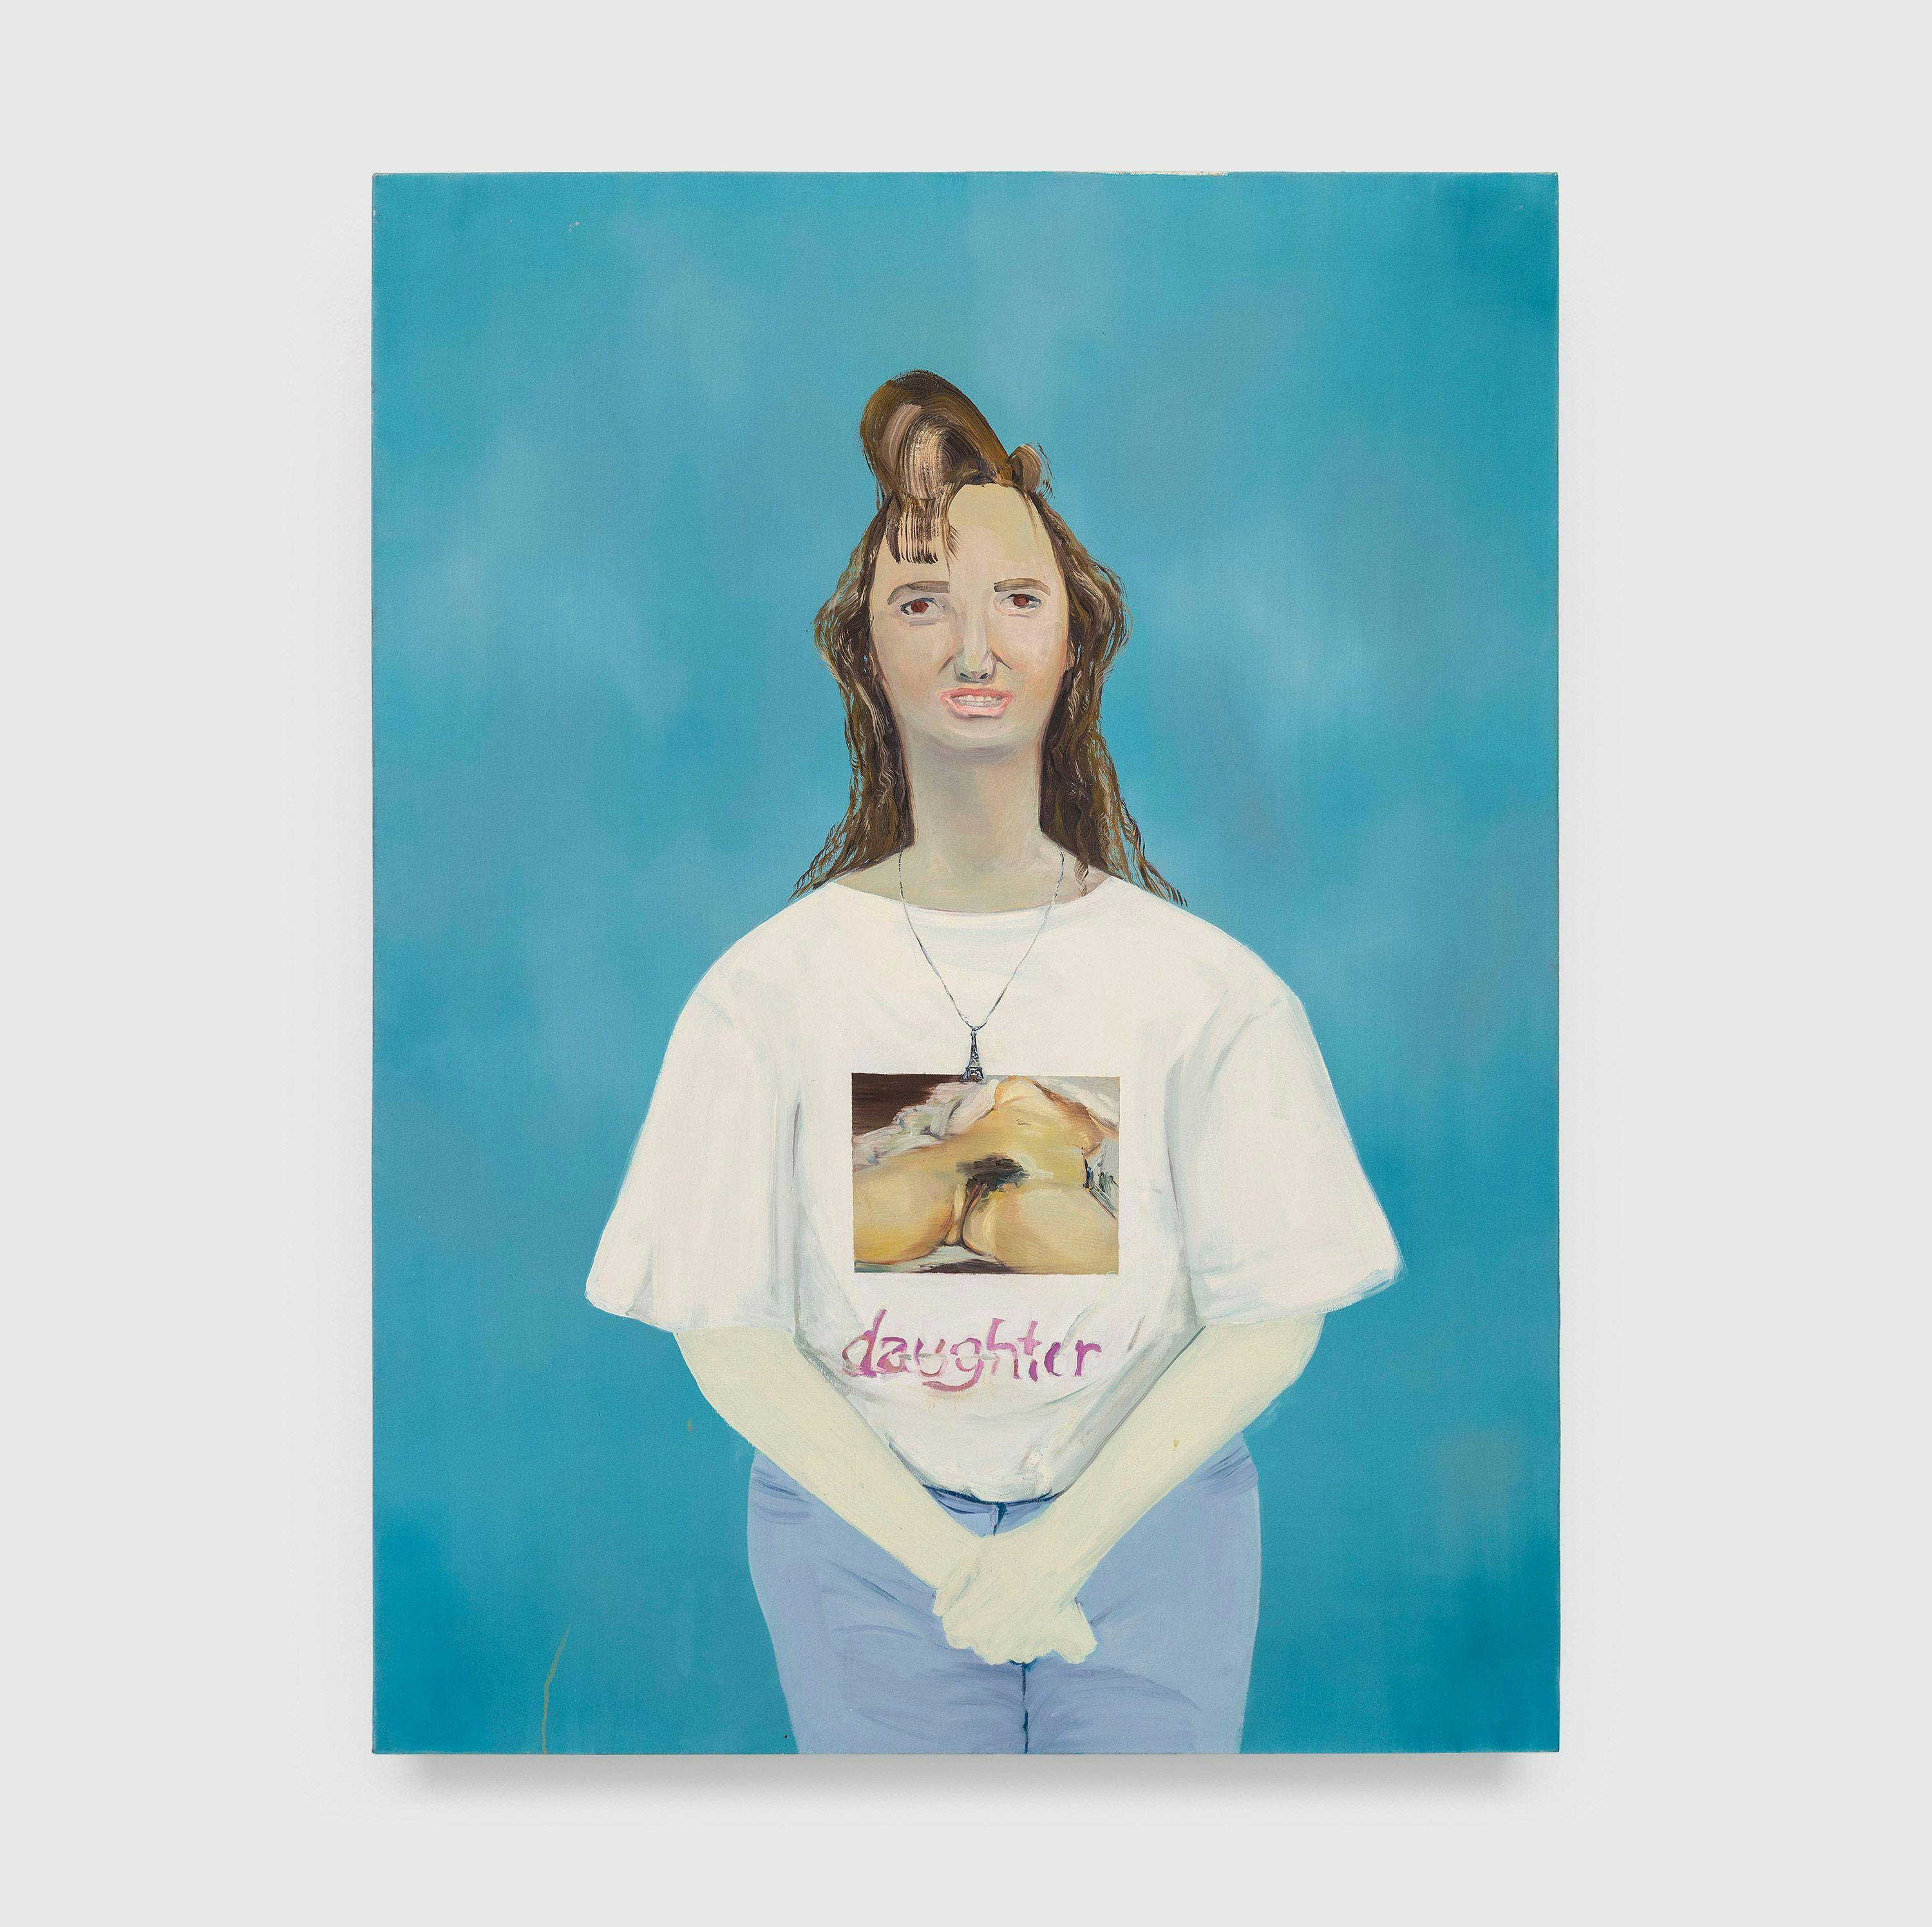 A painting by Dana Schutz, titled Daughter, dated 2000.